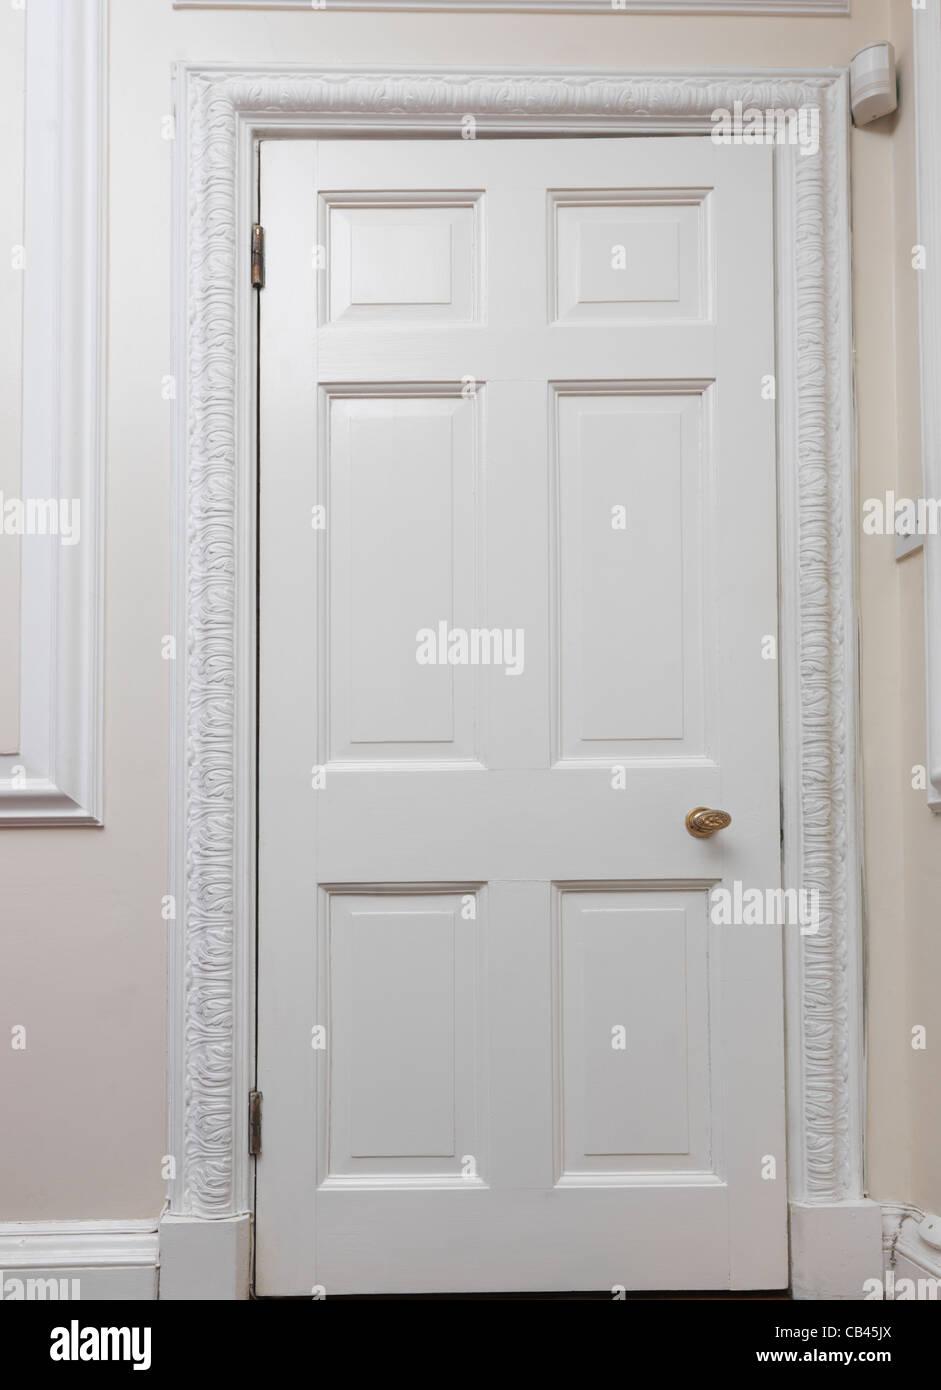 Painted Living Room Door With Gloss Finish Stock Photo